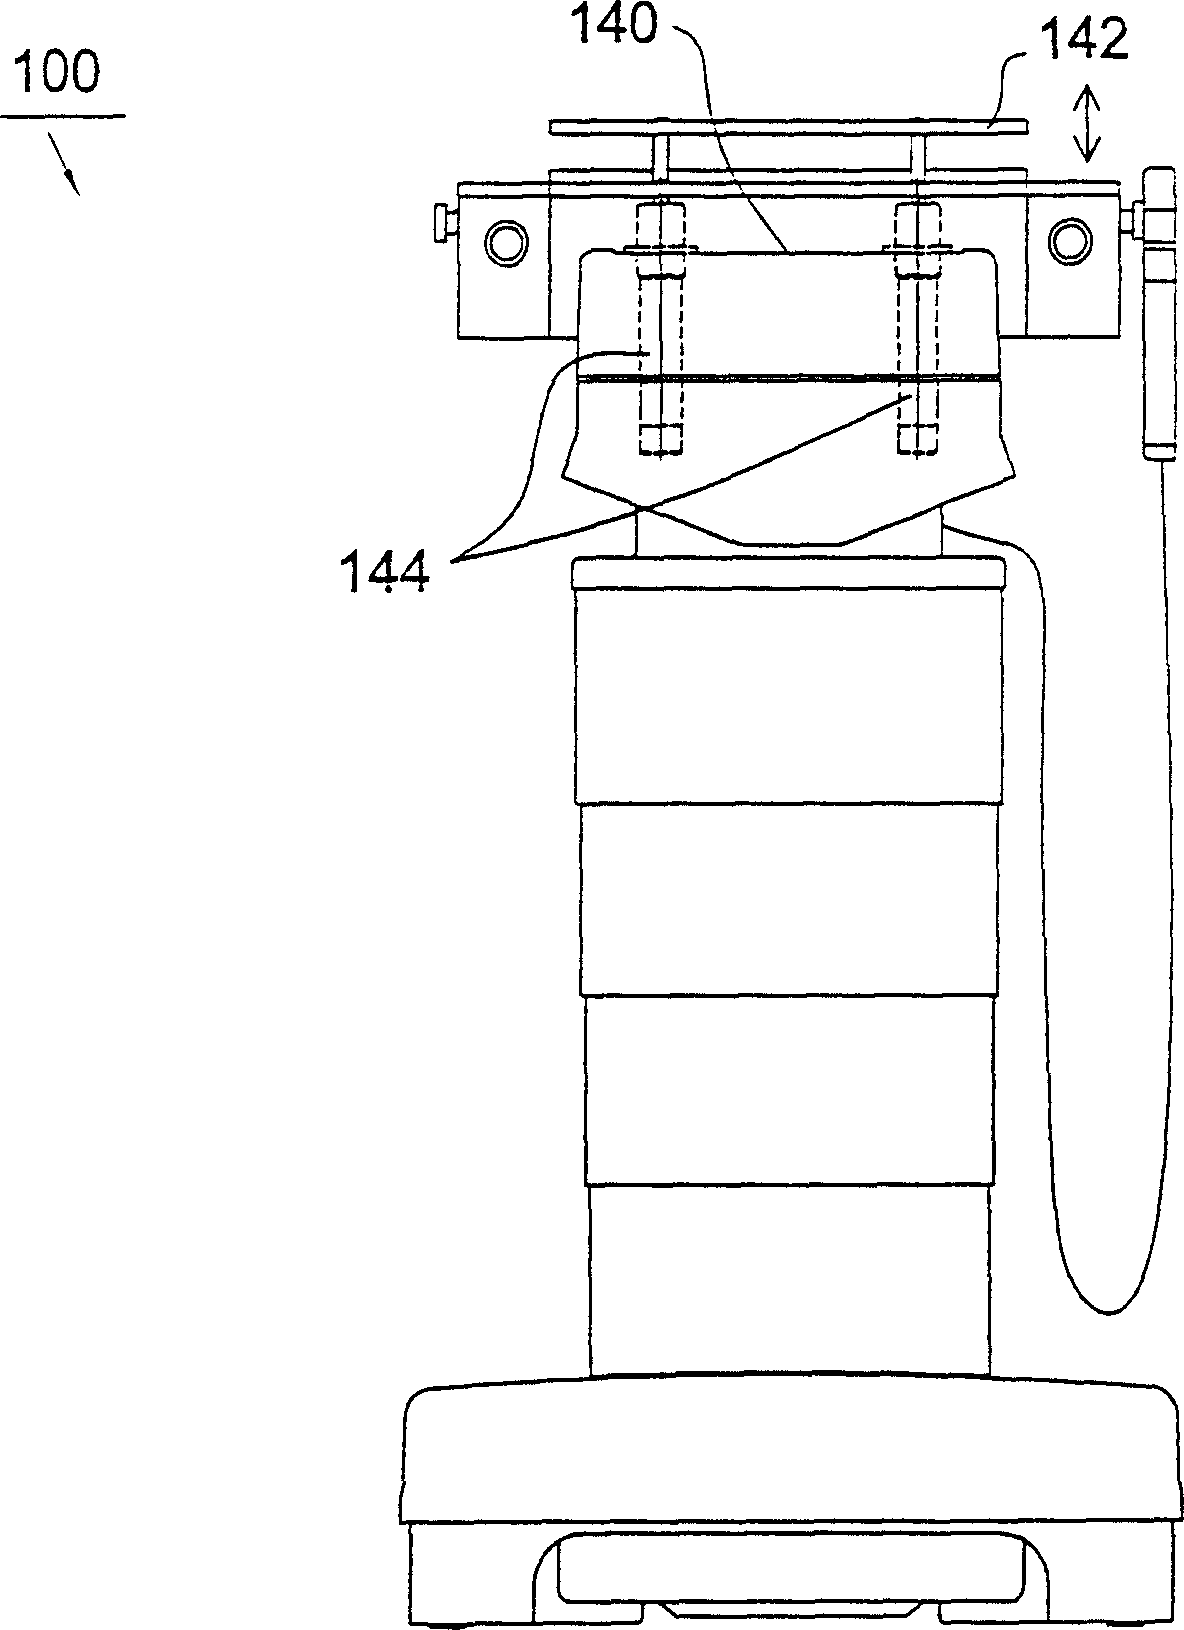 Synchronous range oil pressure unit of operating table